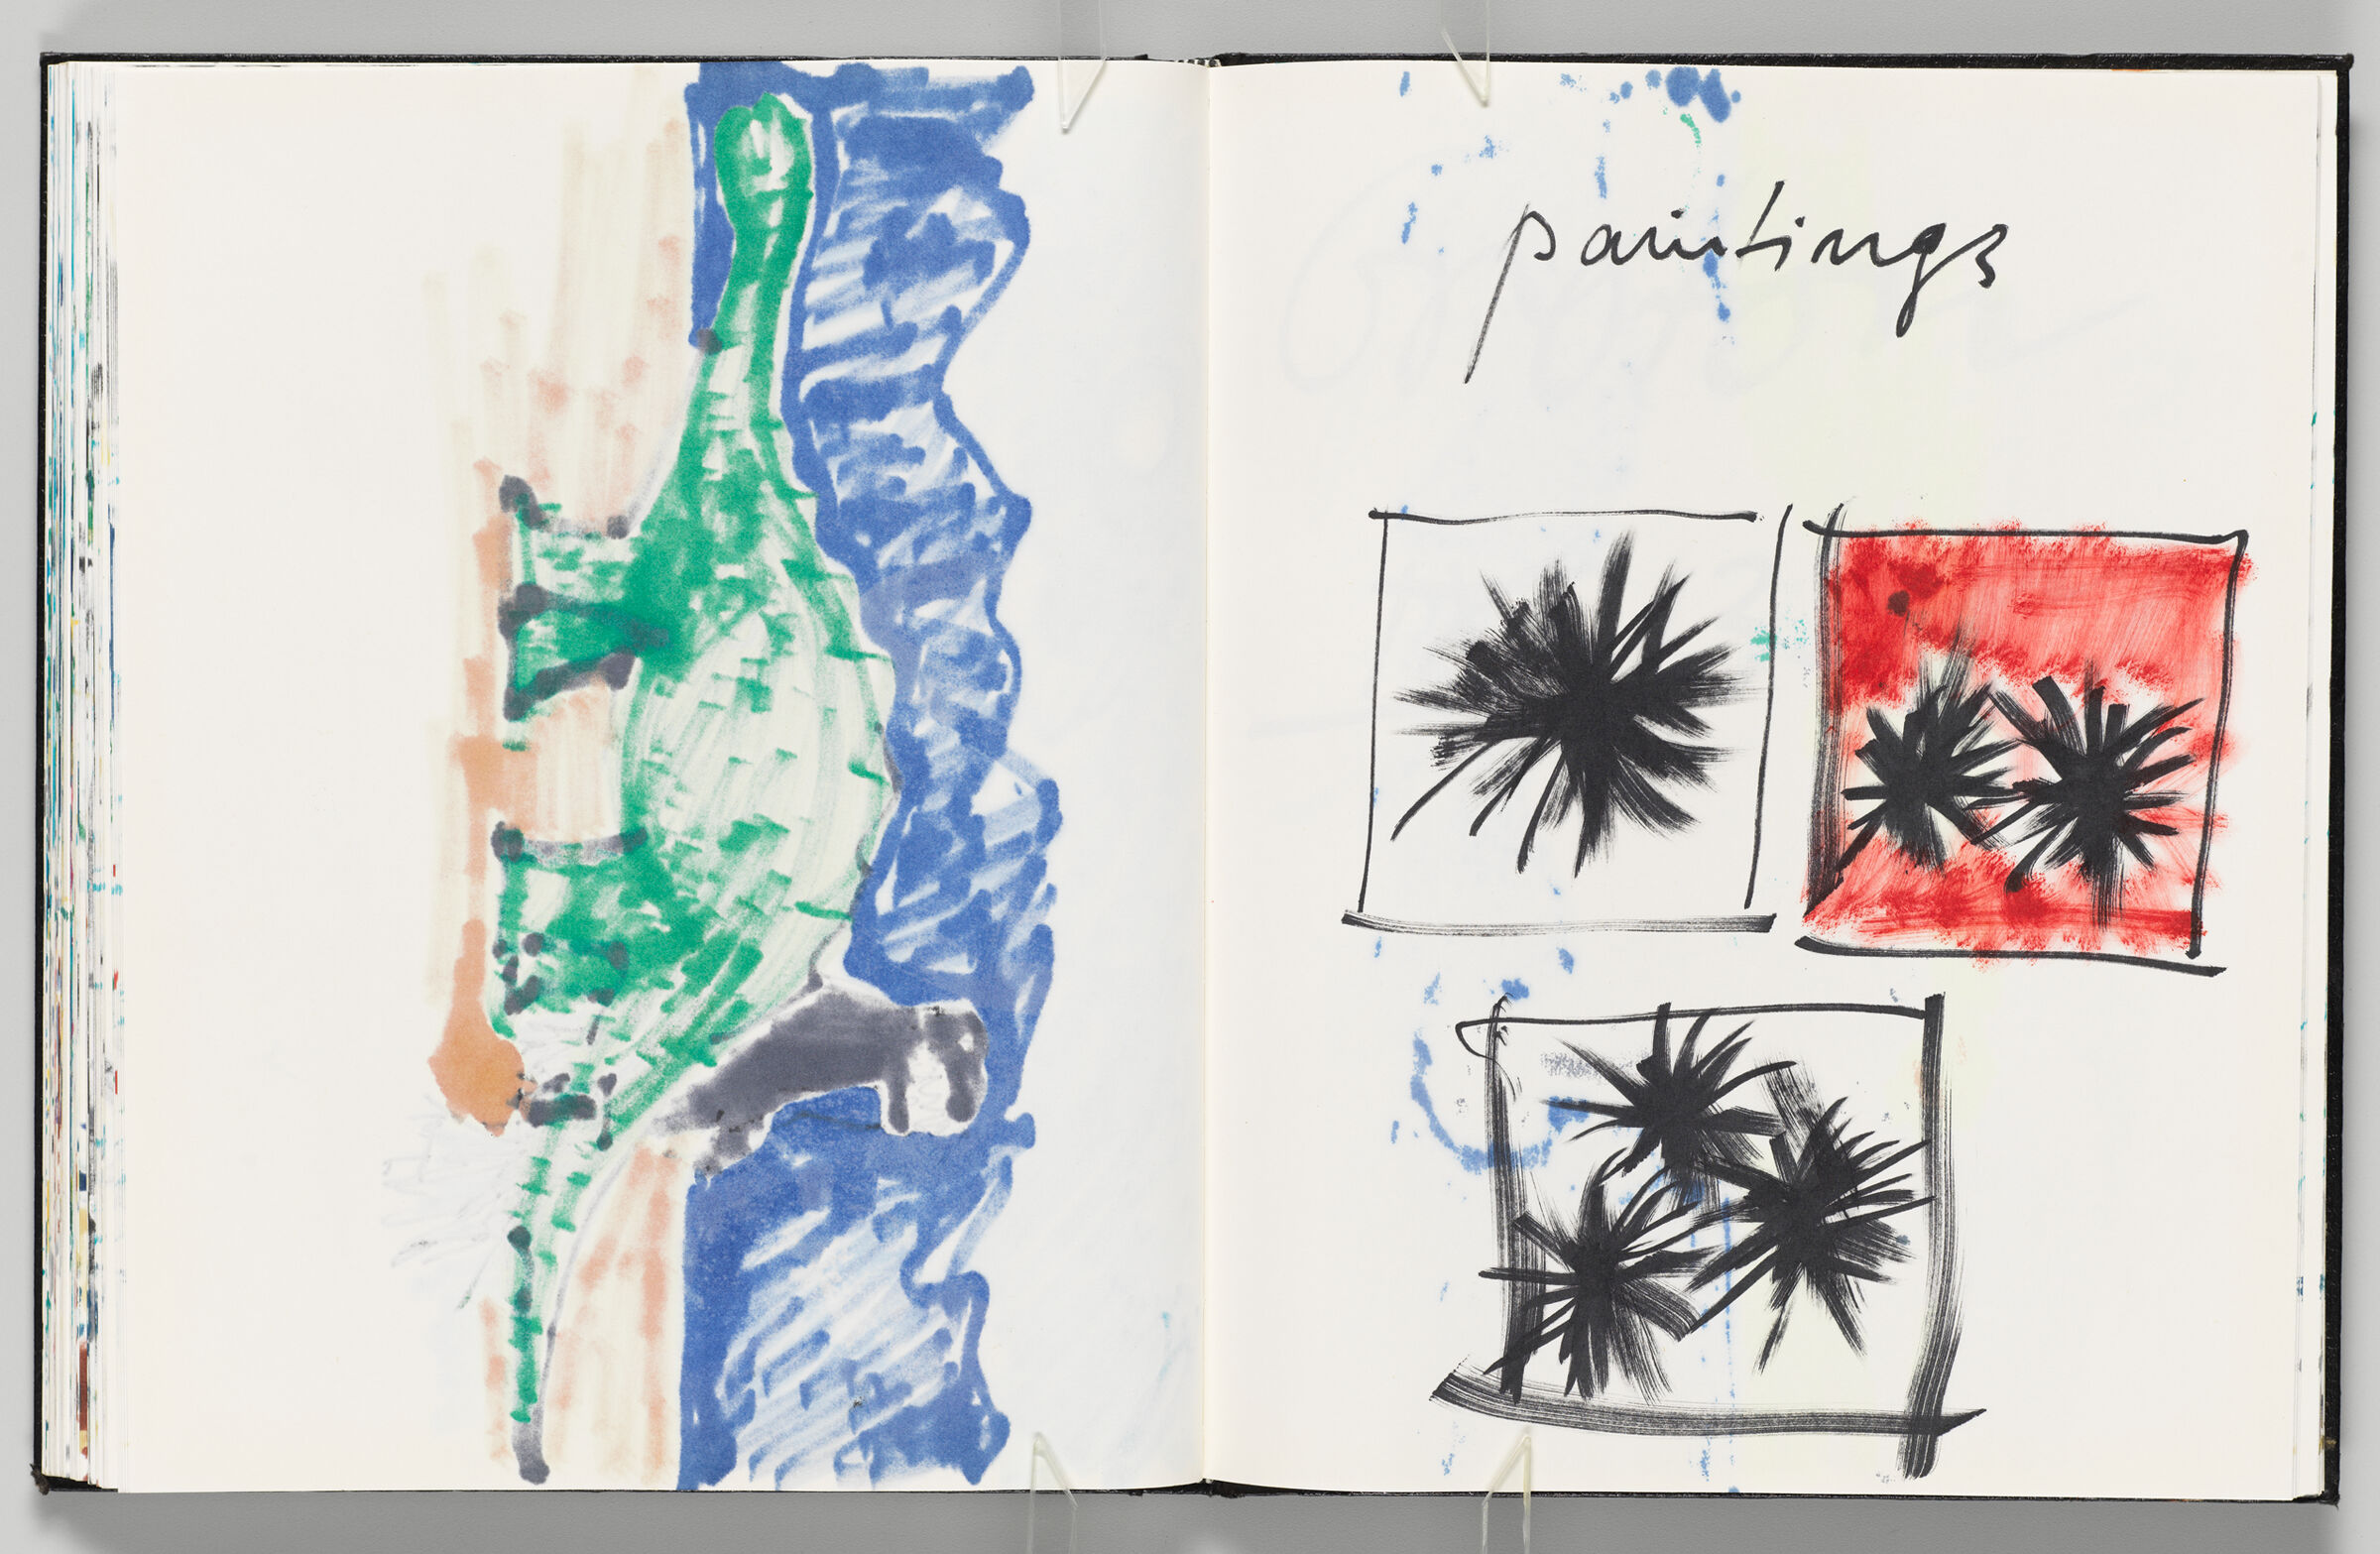 Untitled (Bleed-Through Of Previous Page, Left Page); Untitled (Sketches Of Paintings, Right Page)